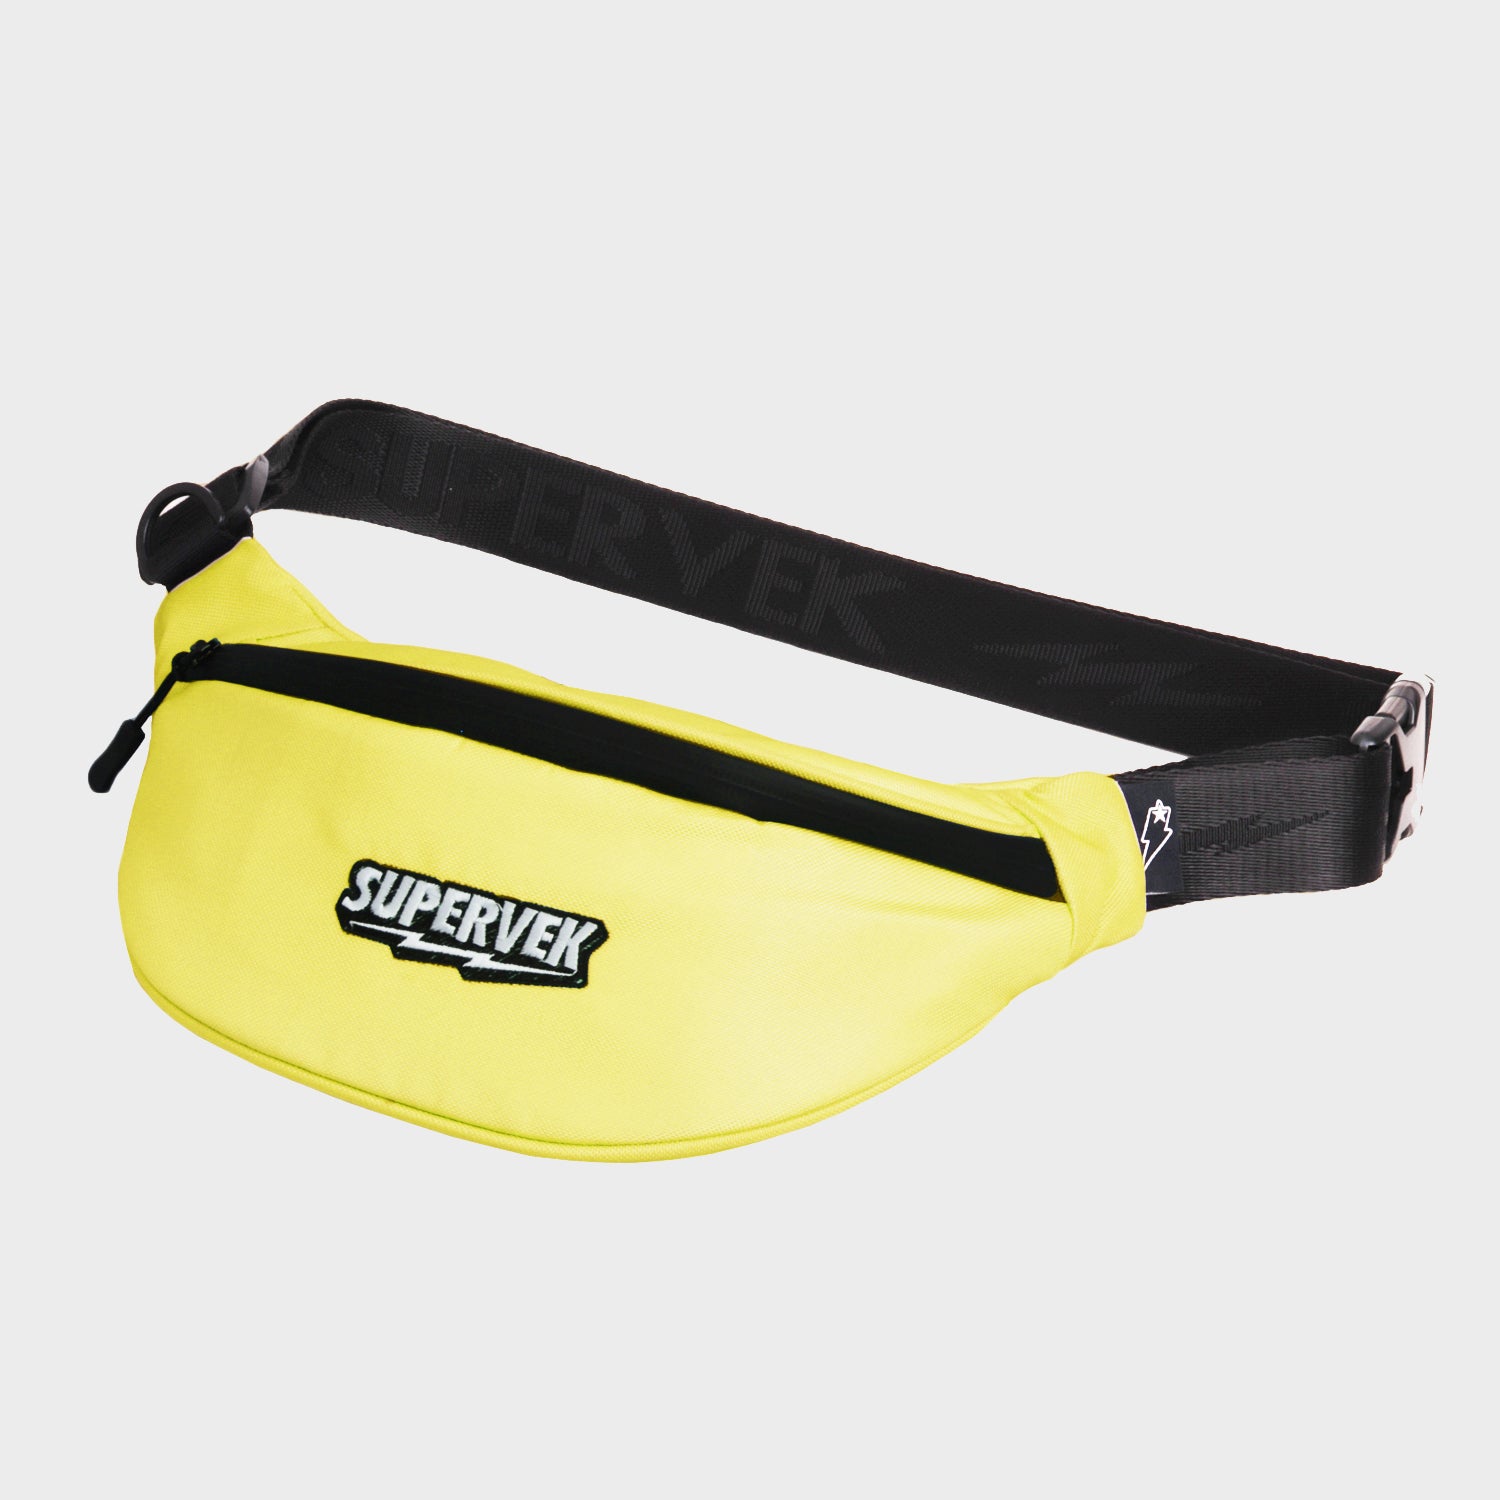 Supervek Crossbody Slinger - Canary Yellow - Urban Functional Fanny Hip Bag for Everyday Essentials - Product Shot